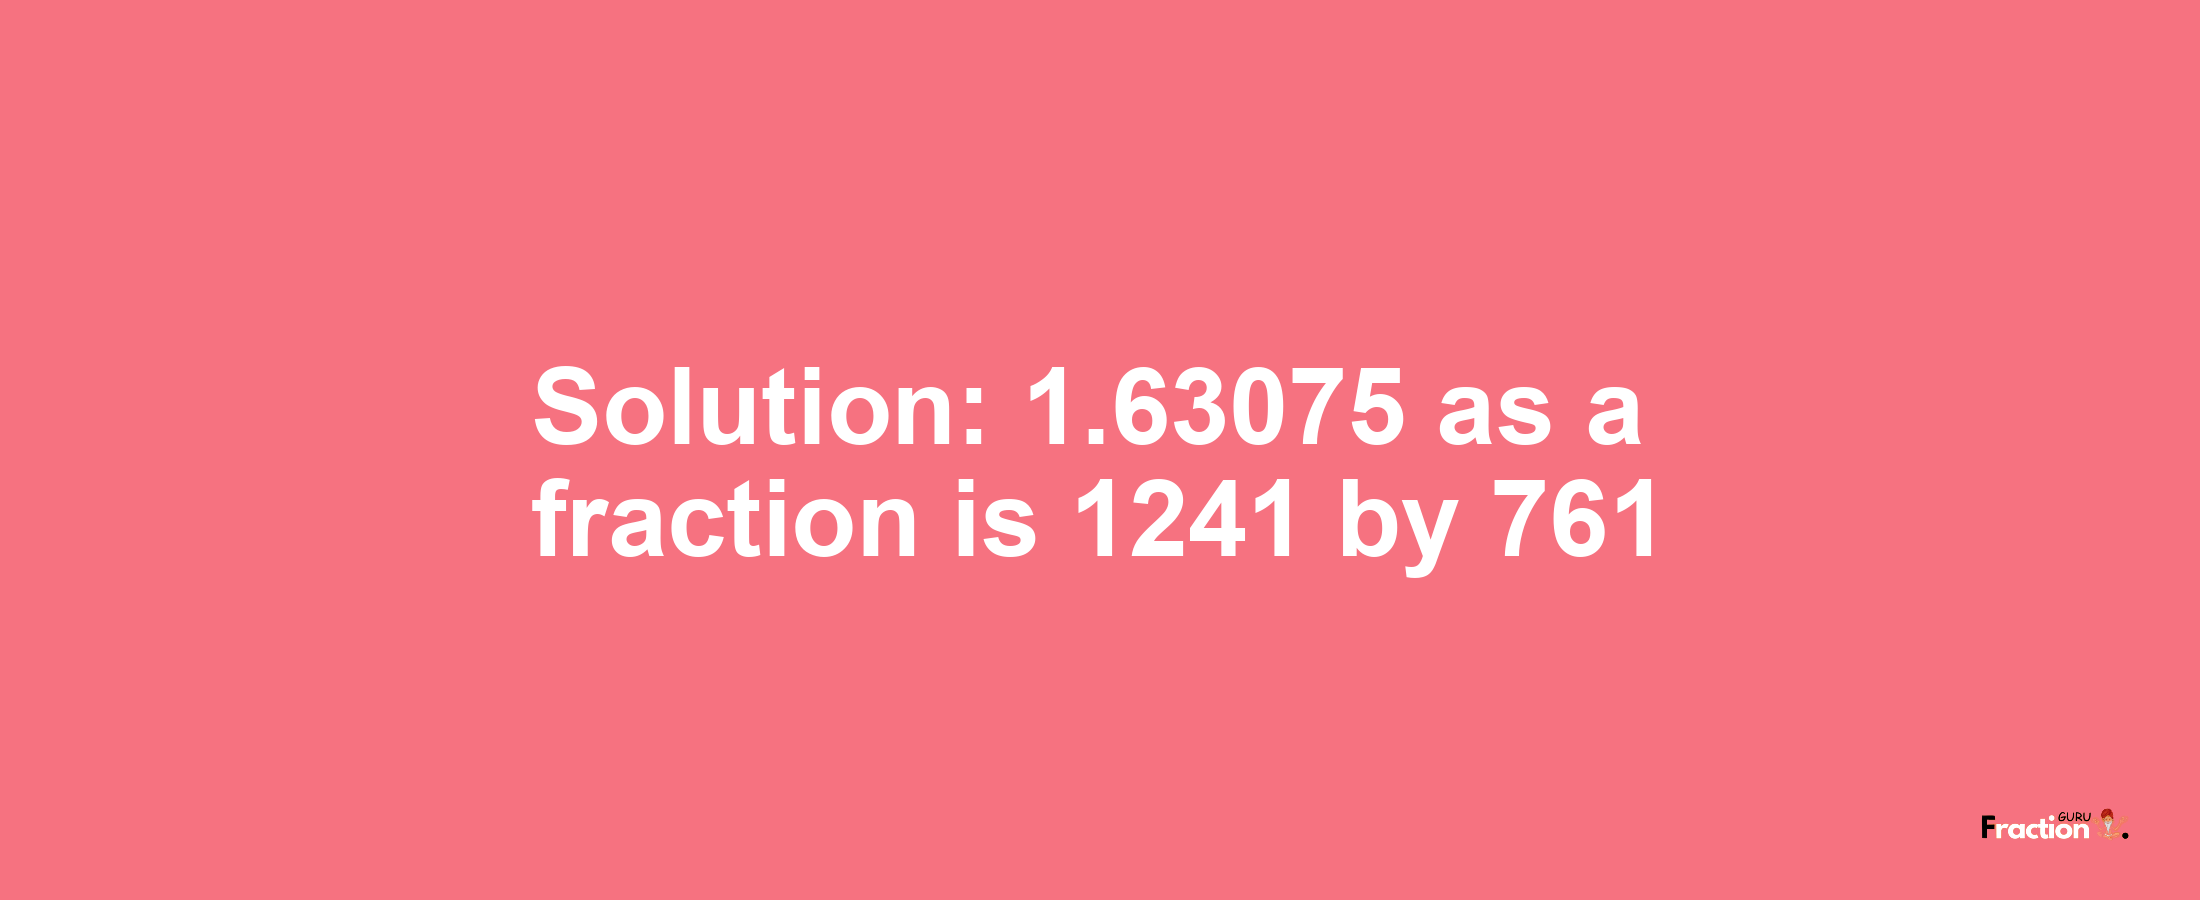 Solution:1.63075 as a fraction is 1241/761